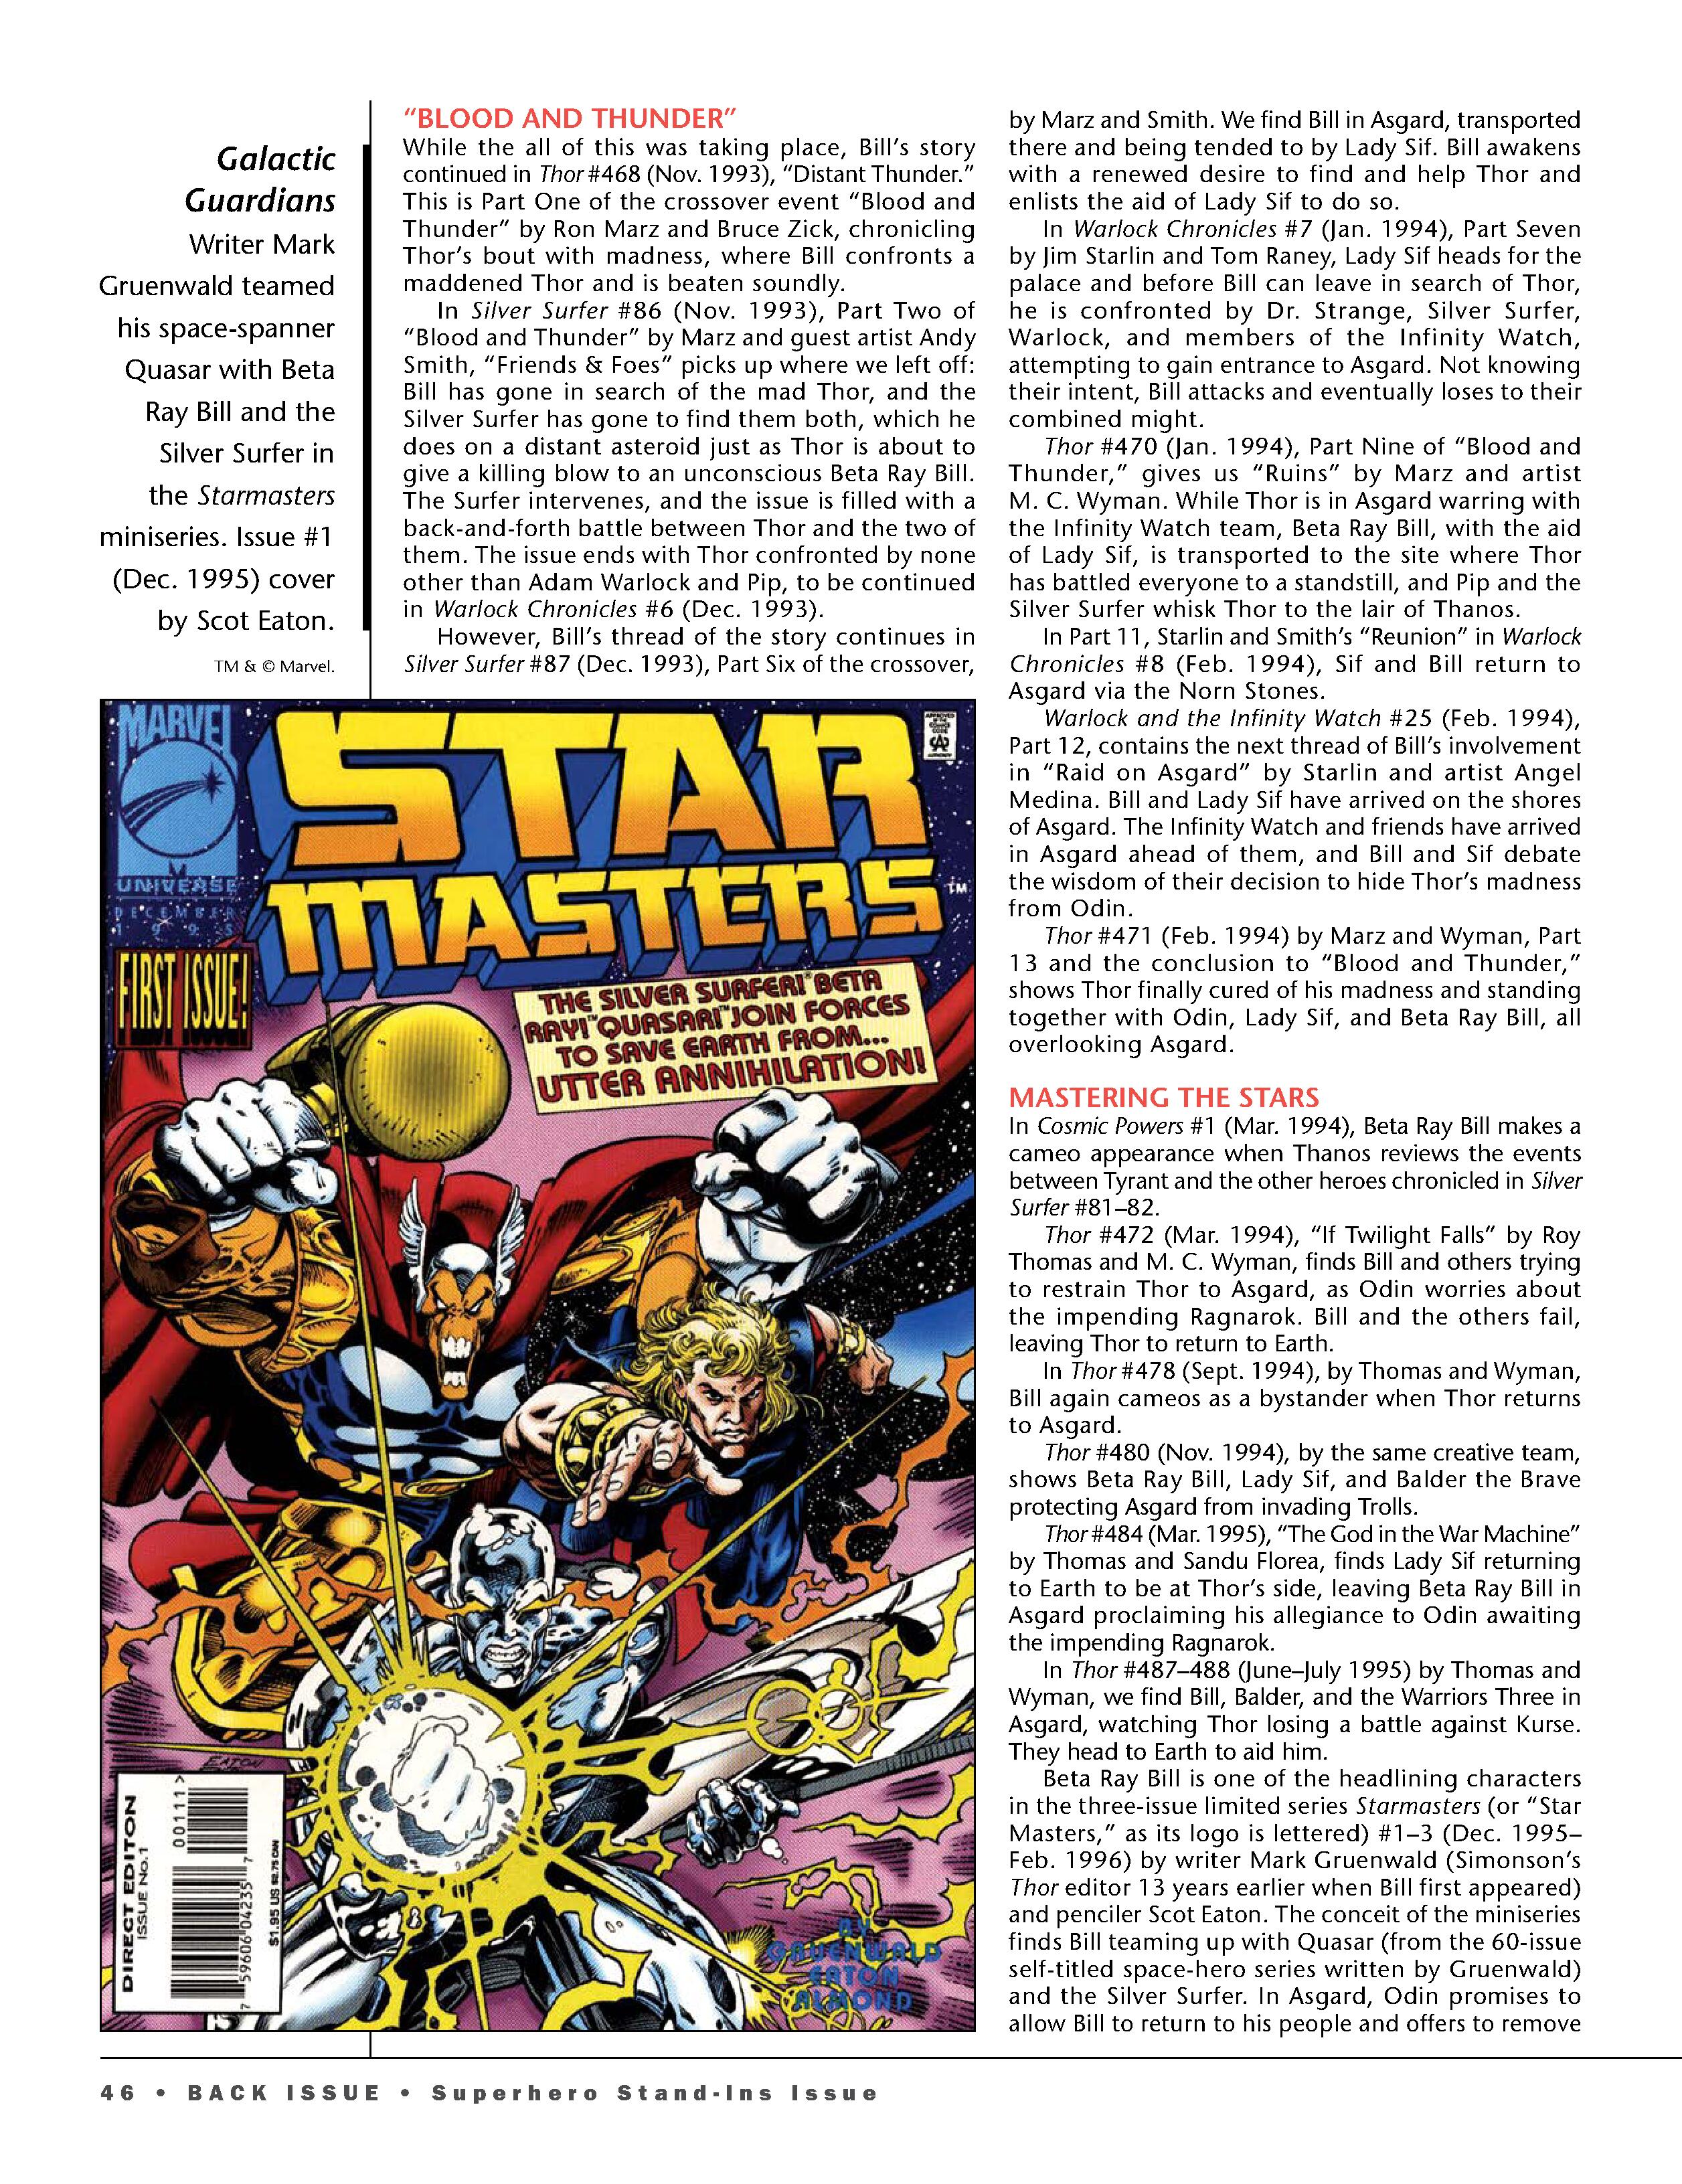 Read online Back Issue comic -  Issue #117 - 48